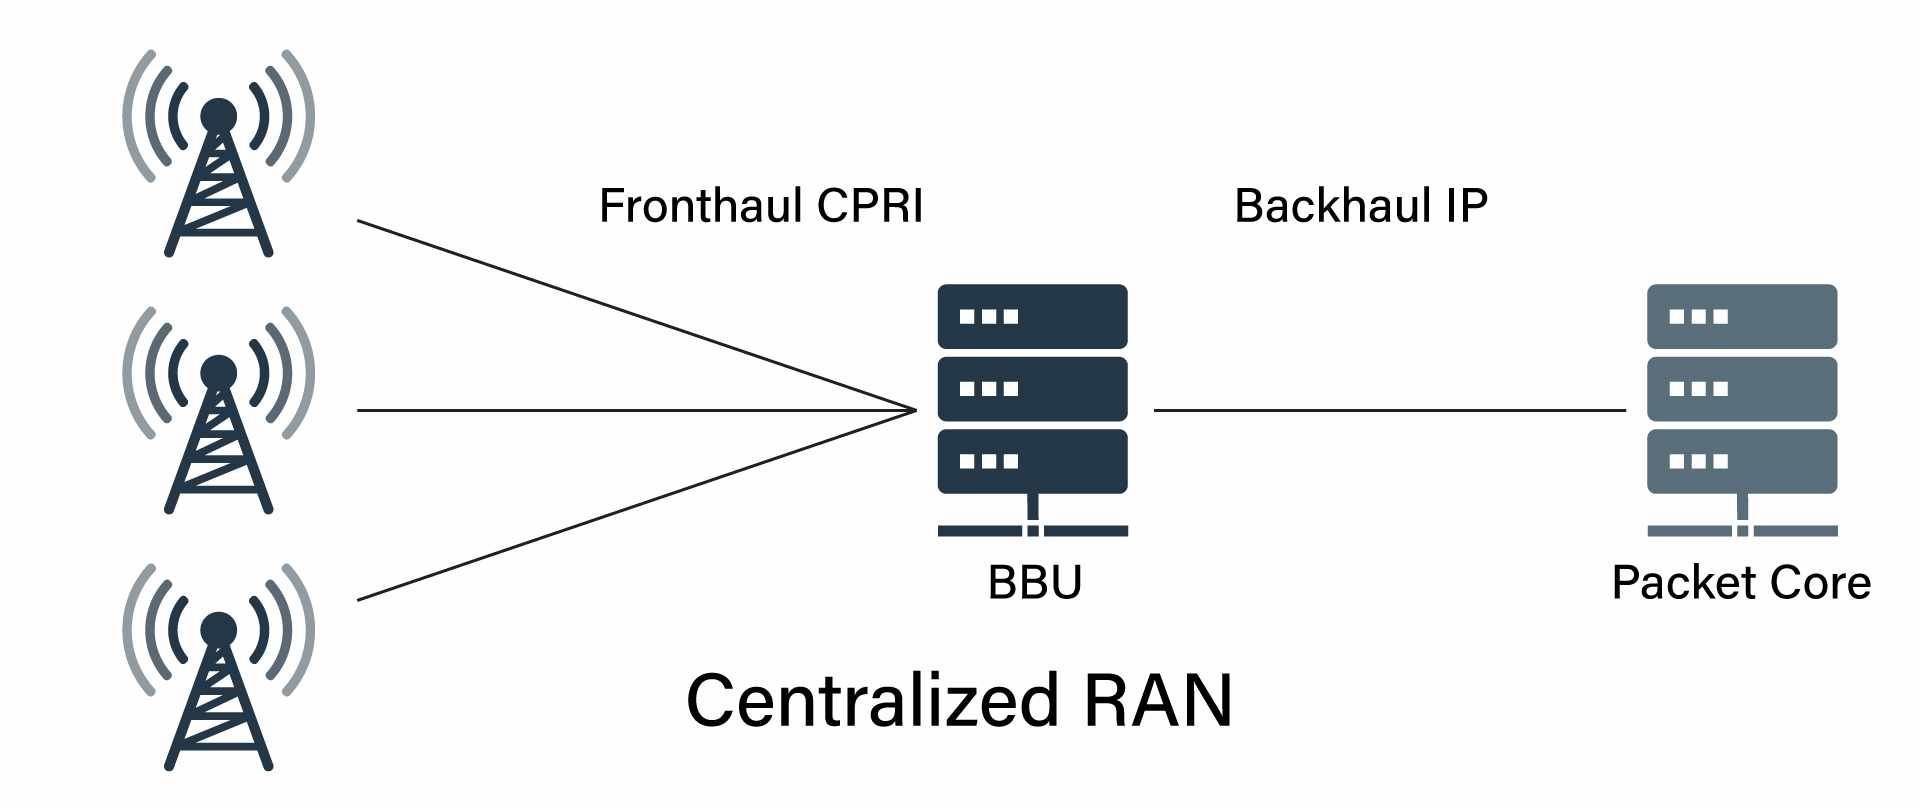 illustration of centralized RAN with fronthaul CPRI and Backhaul IP.